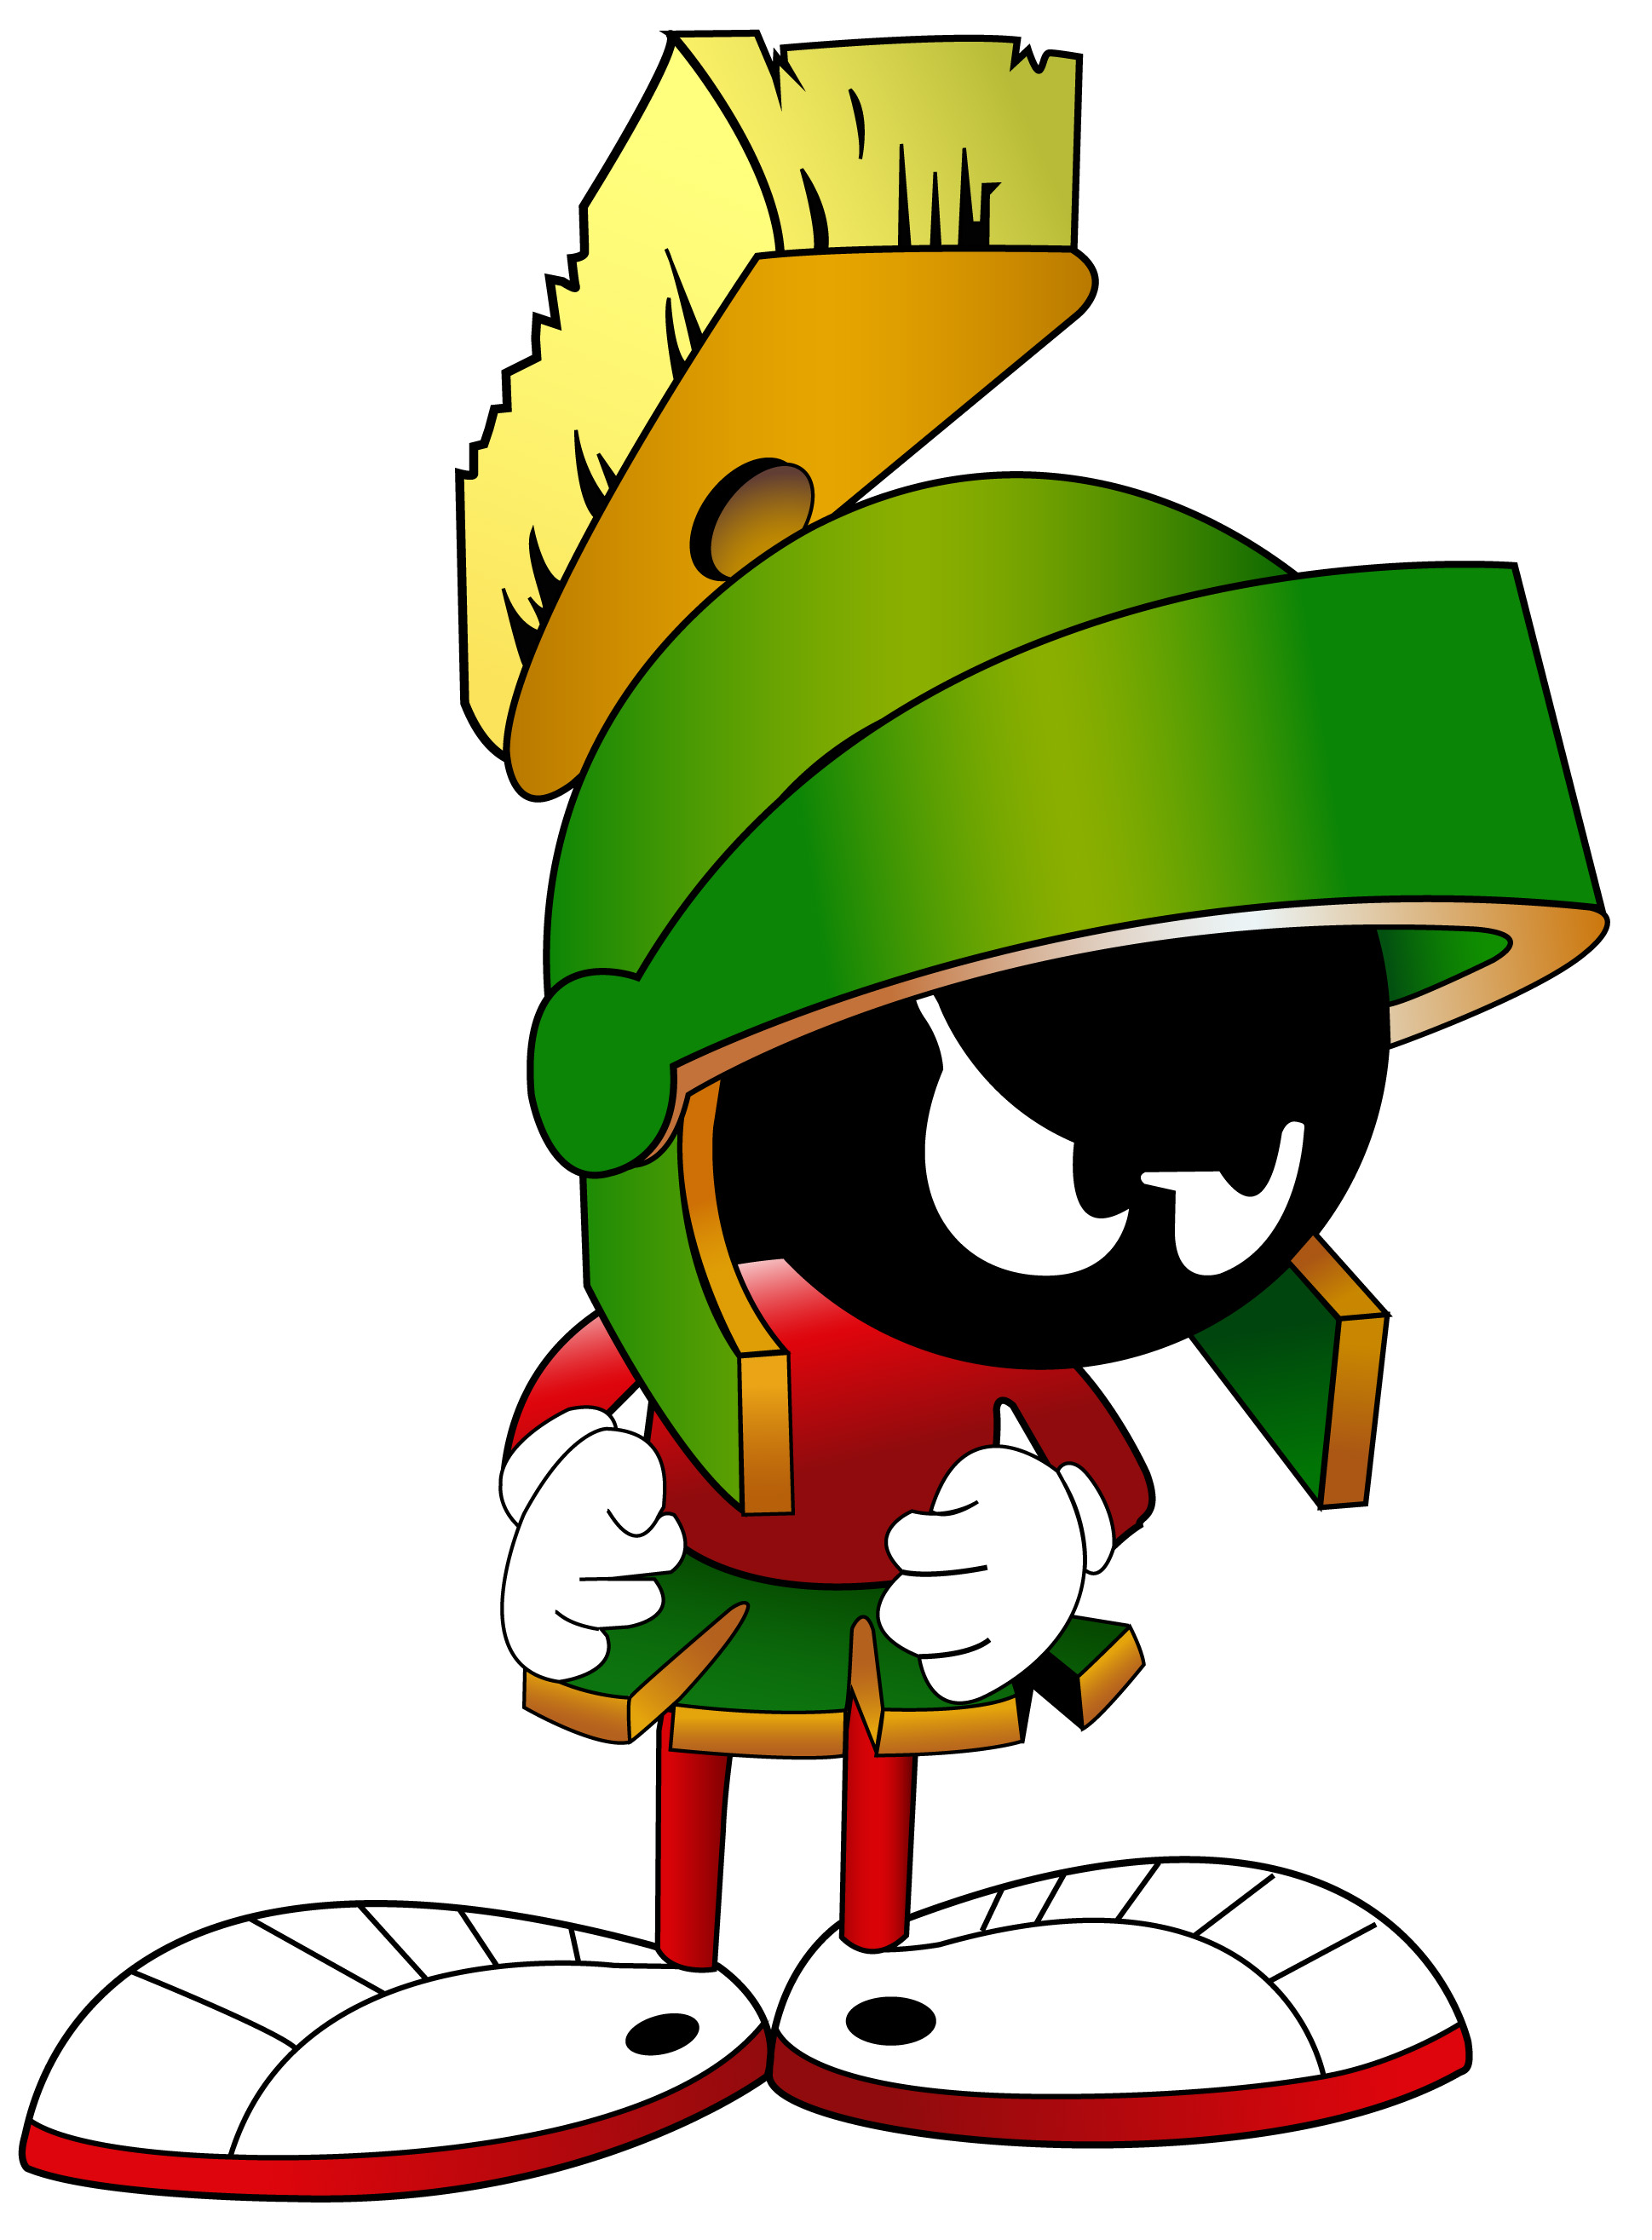 Marvin The Martian (character) - Looney Tunes Wiki